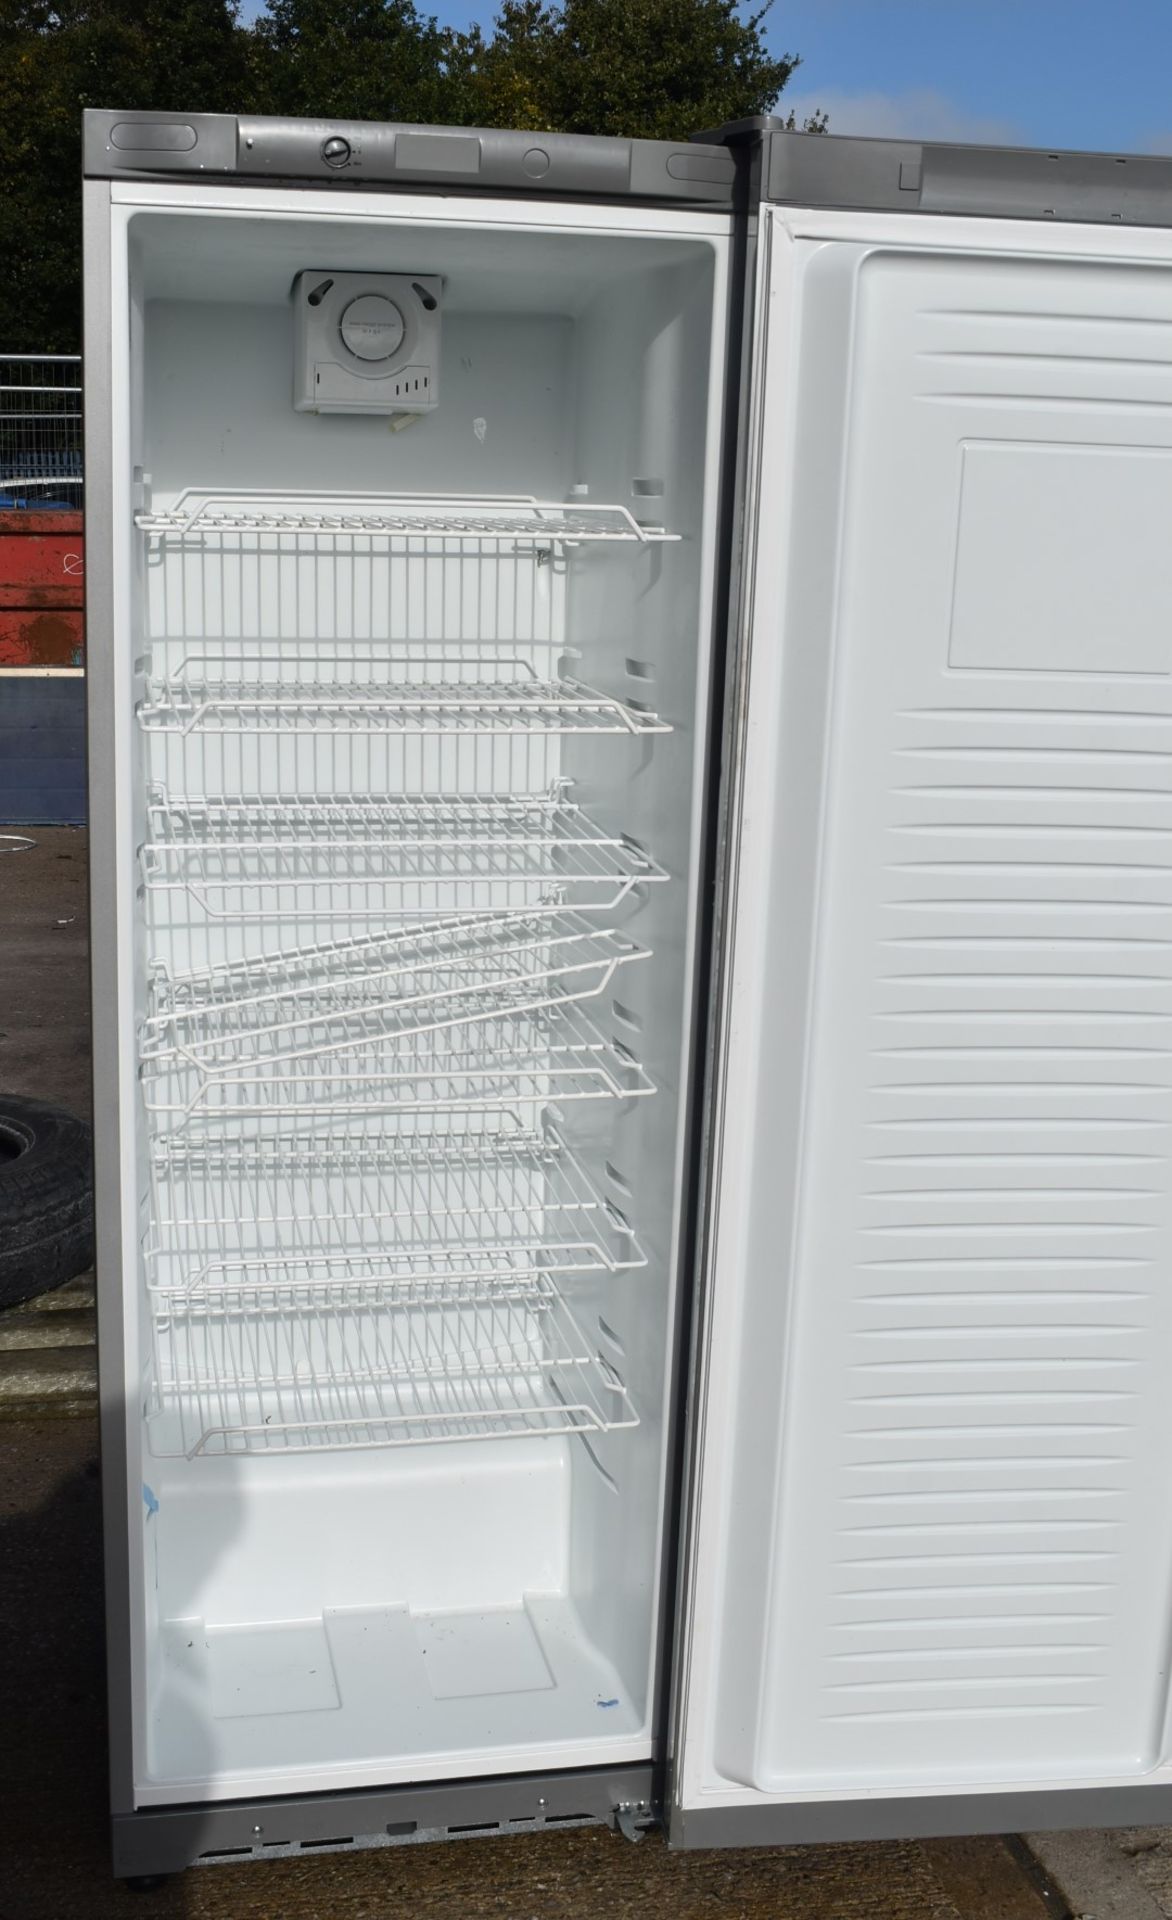 1 x Elstar Upright Commercial Refridgerator With Silver Finish - Model ARR350S - Image 7 of 8